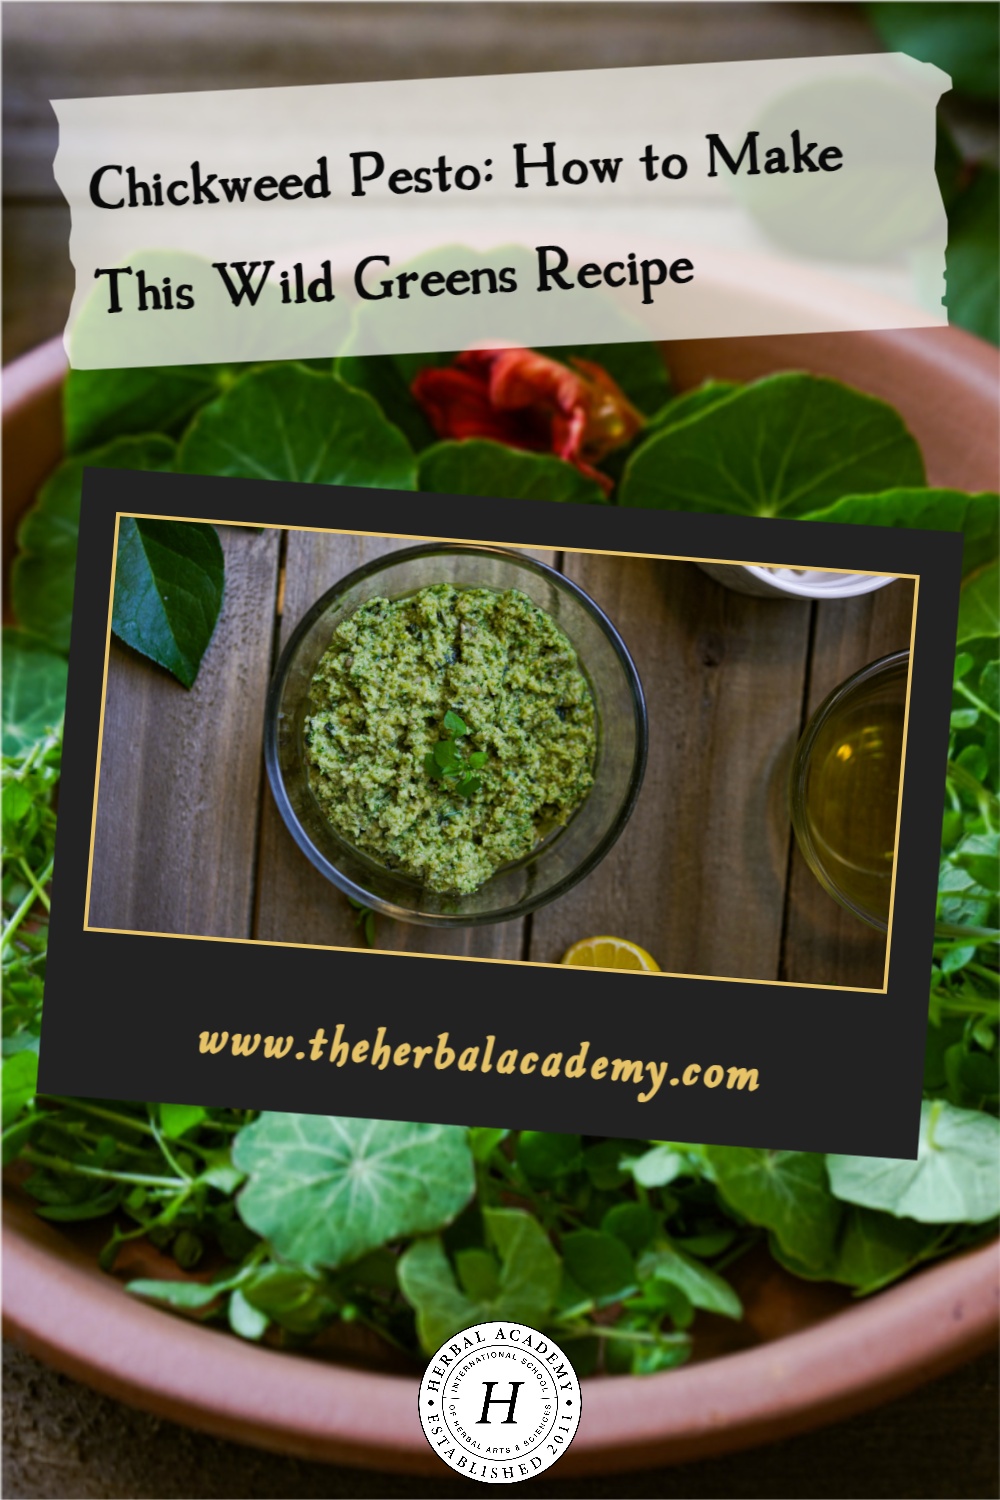 Chickweed Pesto: How to Make This Wild Greens Recipe | Herbal Academy | Chickweed is a fantastic edible green to learn how to recognize and use in herbal recipes, like chickweed pesto!